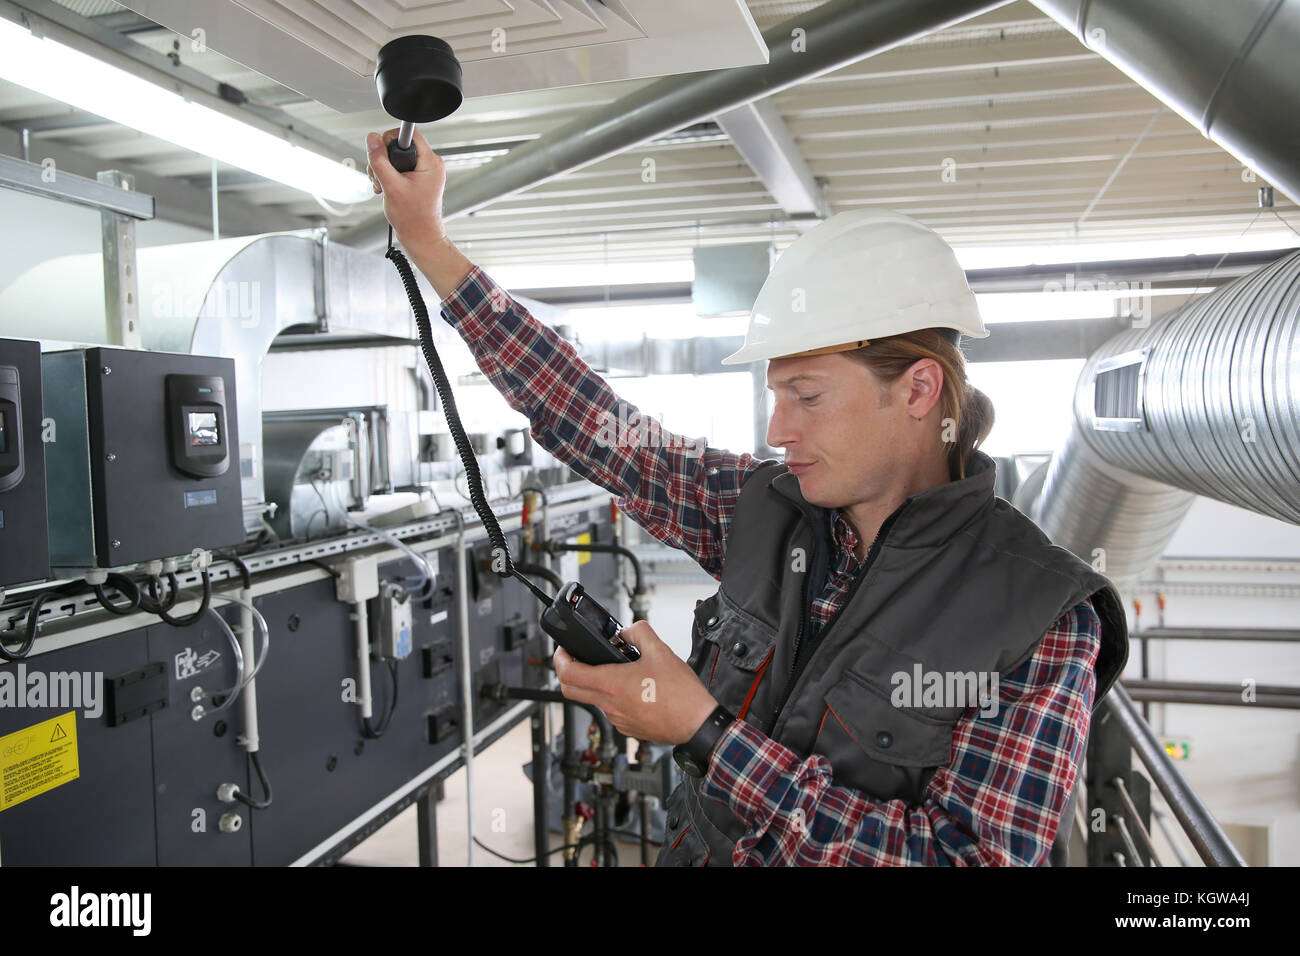 Technician controlling air quality of heating equipment Stock Photo